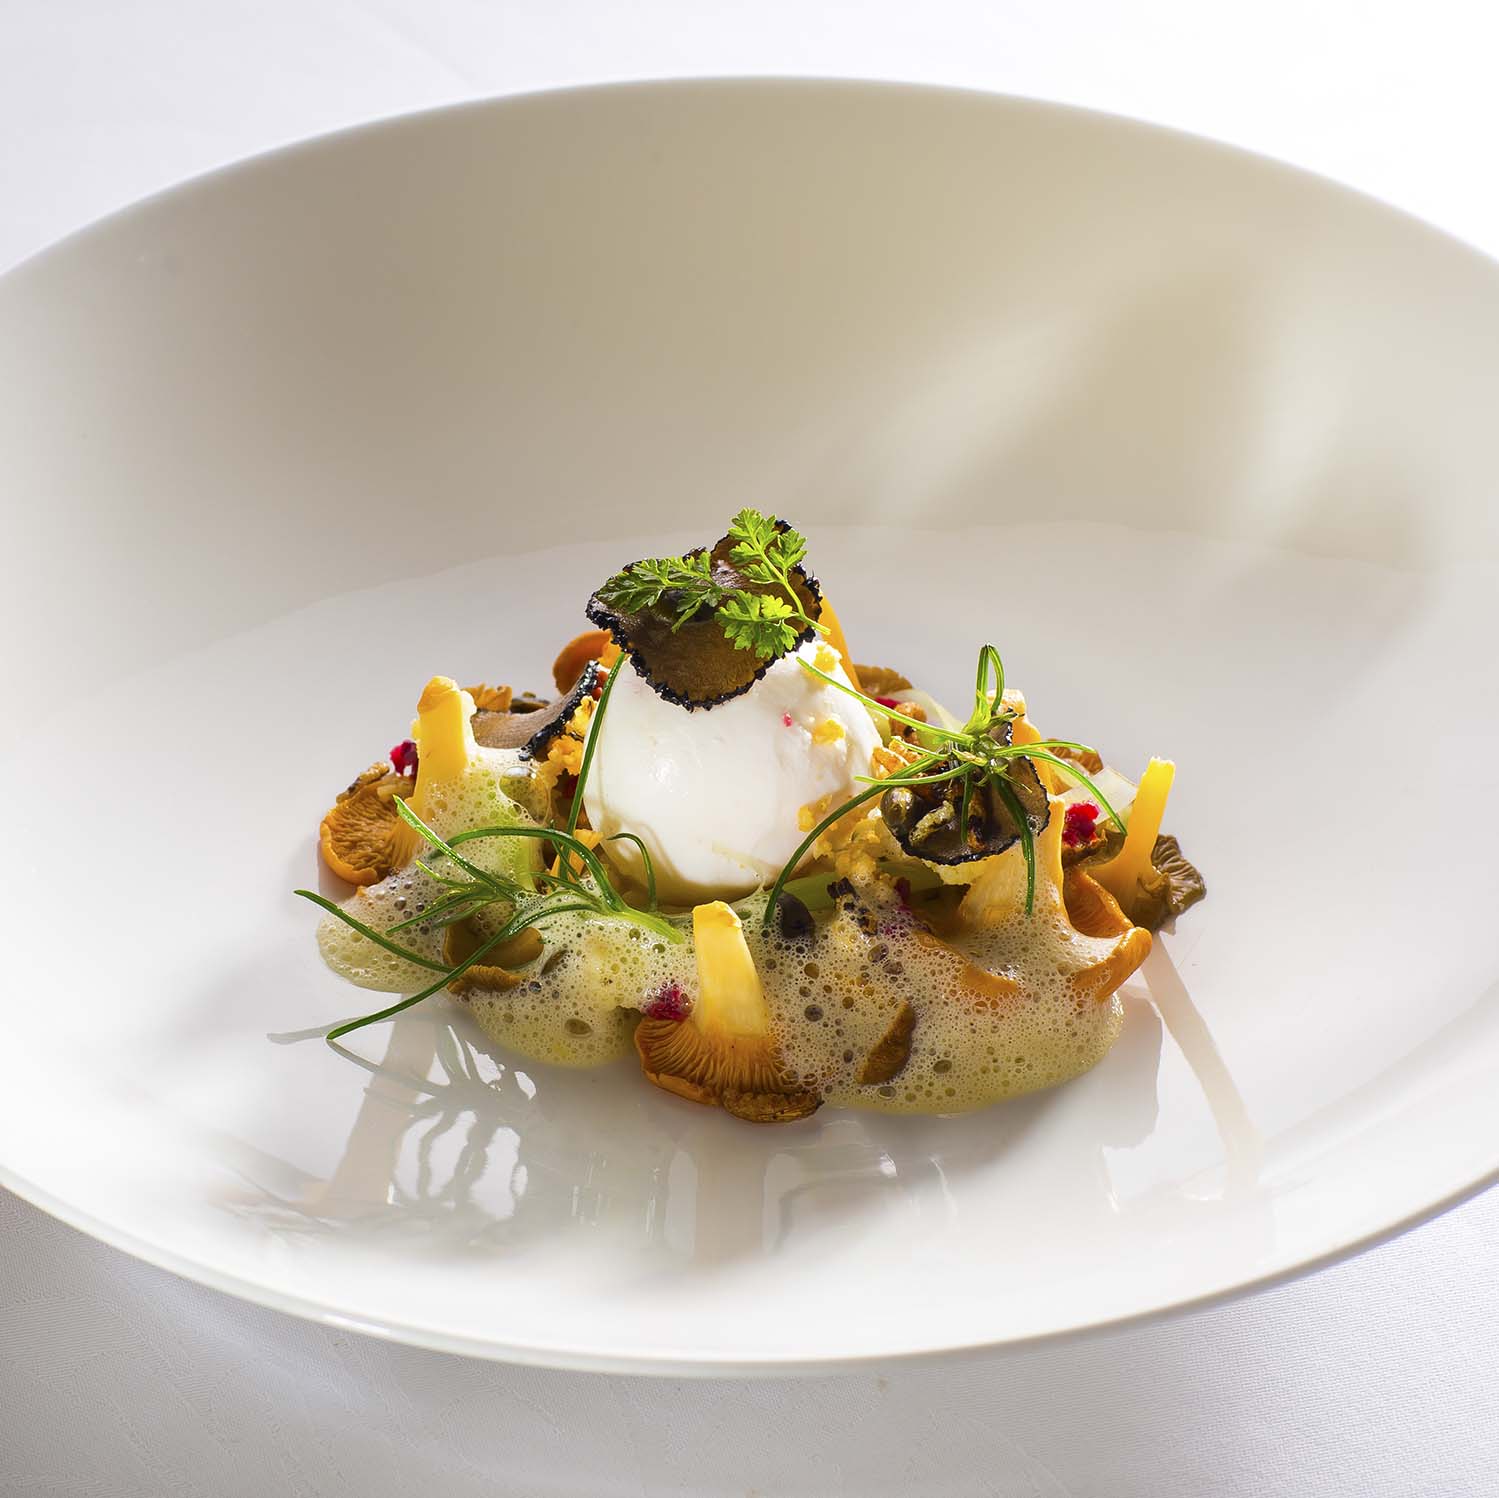 Katie Machin poached free-range egg with summer truffle, chanterelle mushrooms and pickled cauliflower.